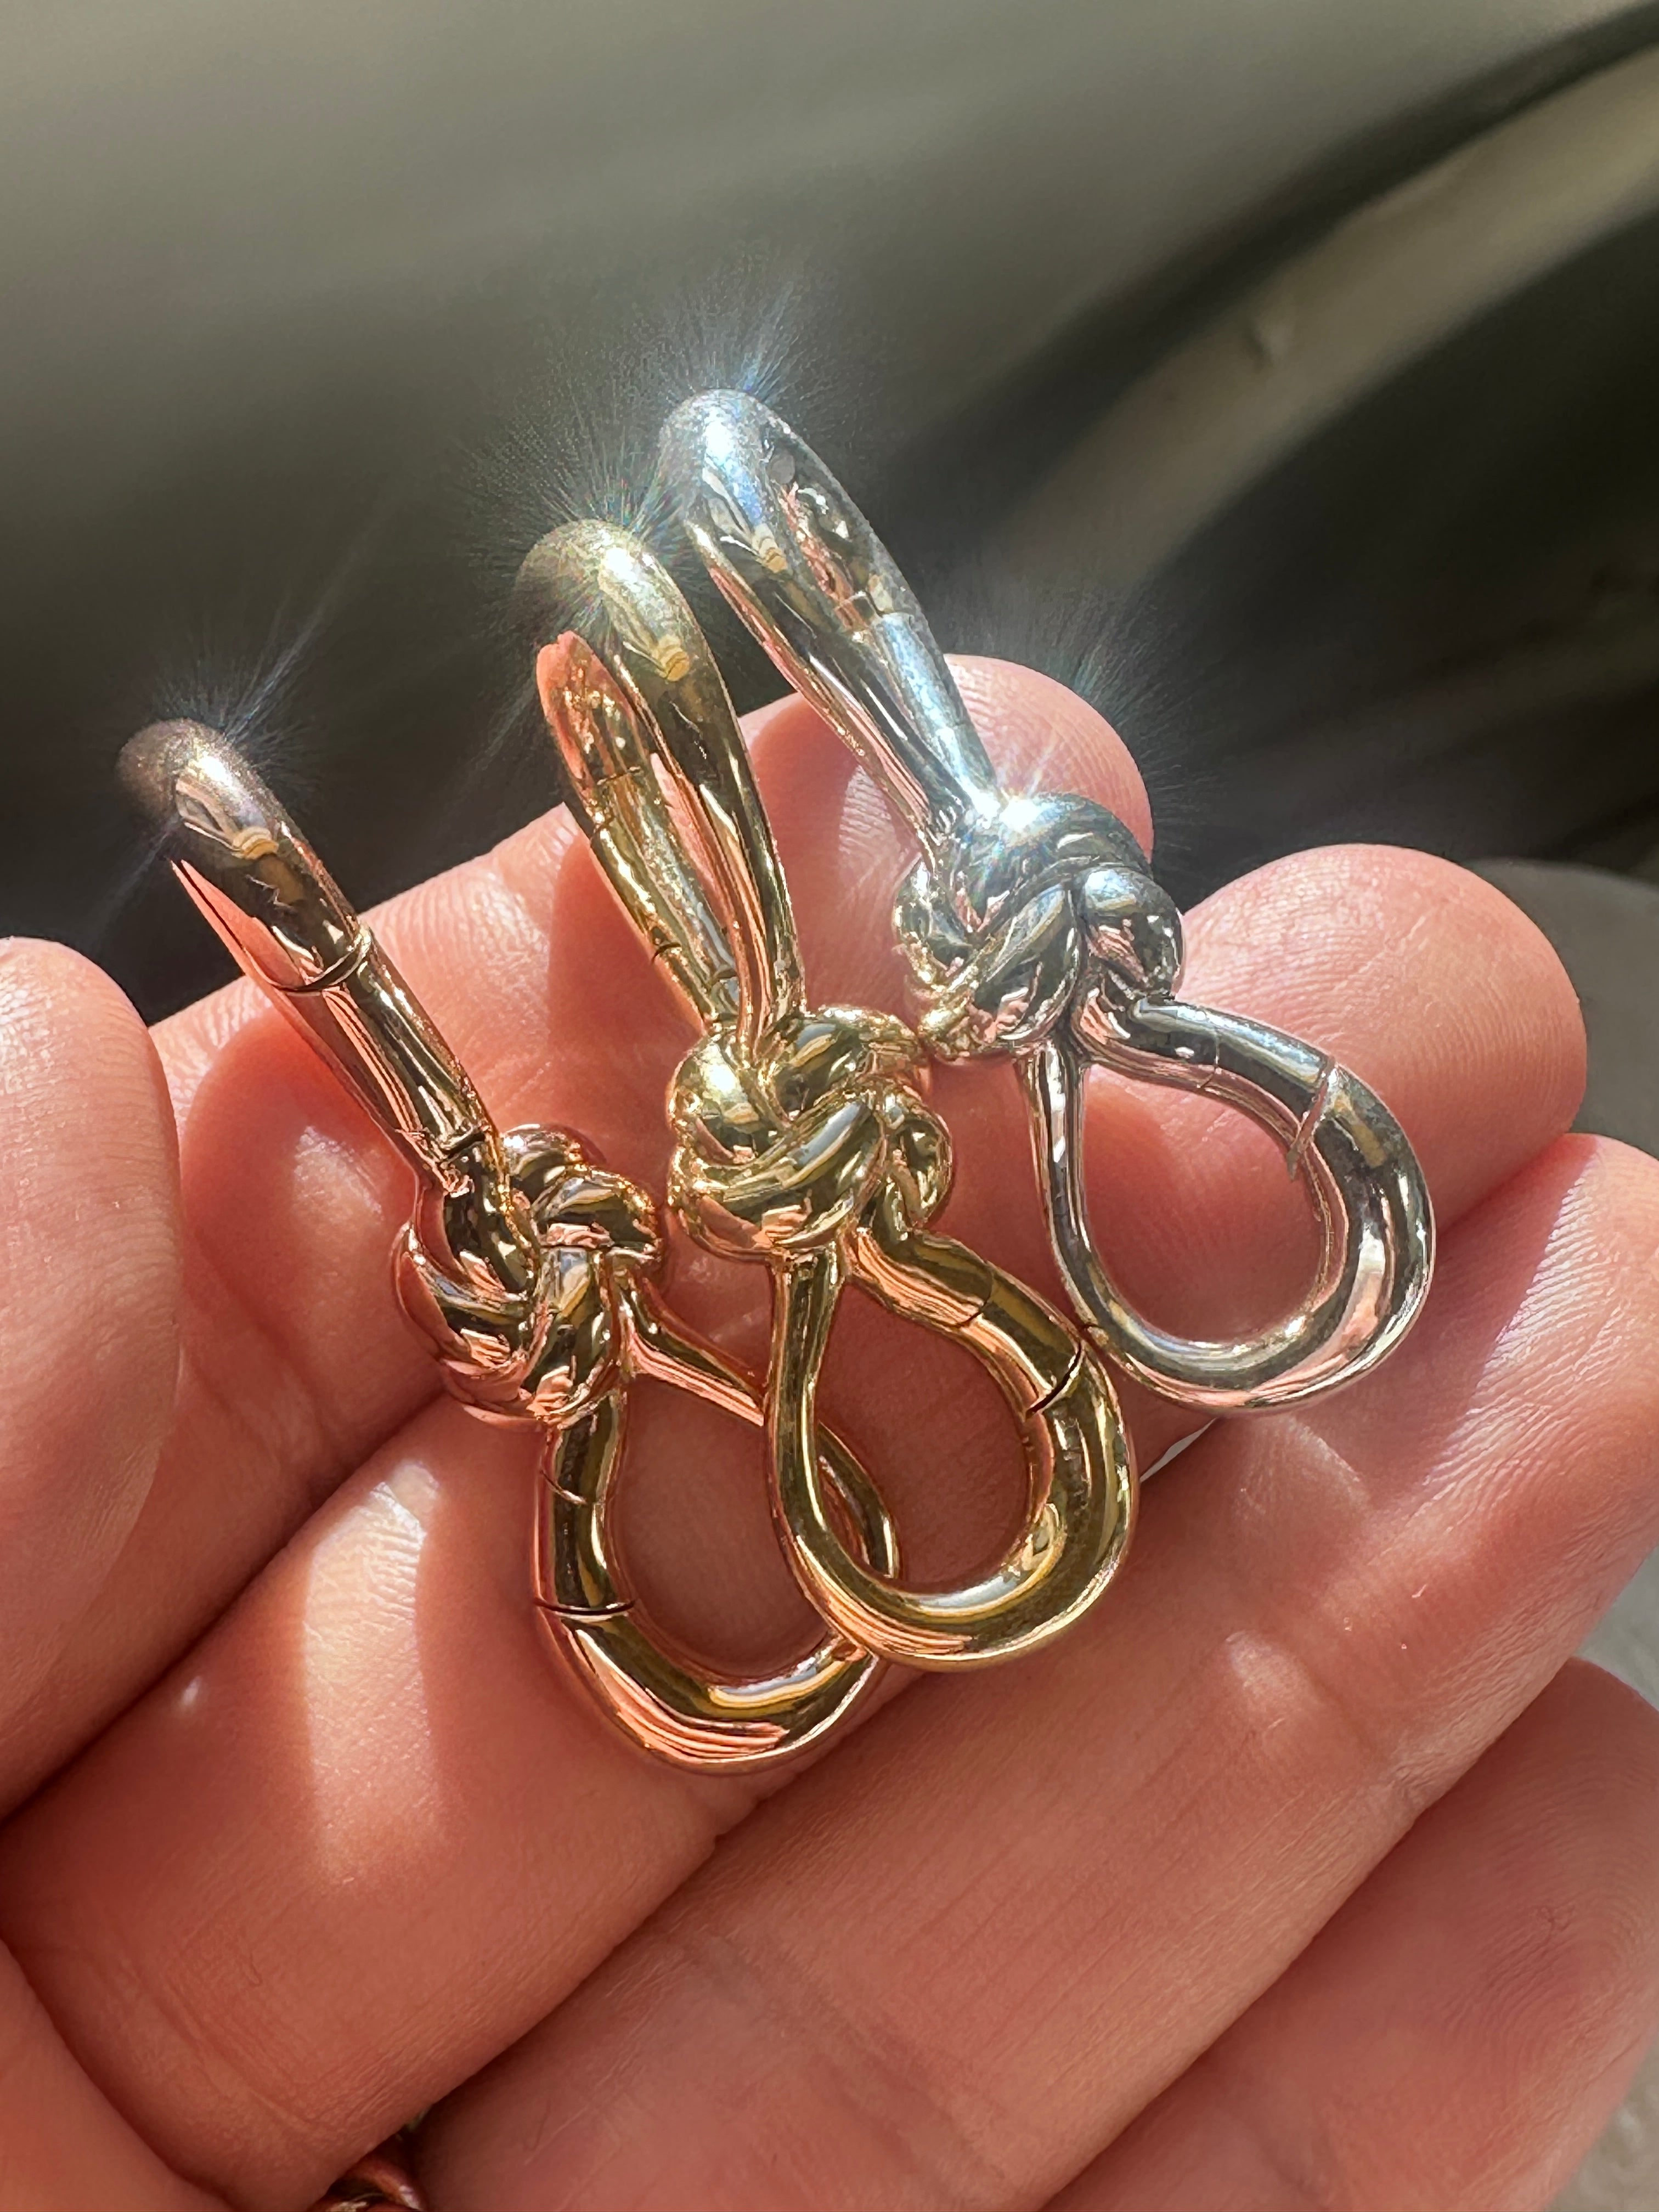 Close up shot of silver, rose gold, and yellow gold knot lock charms in the palm of hand with sunlight shining on them